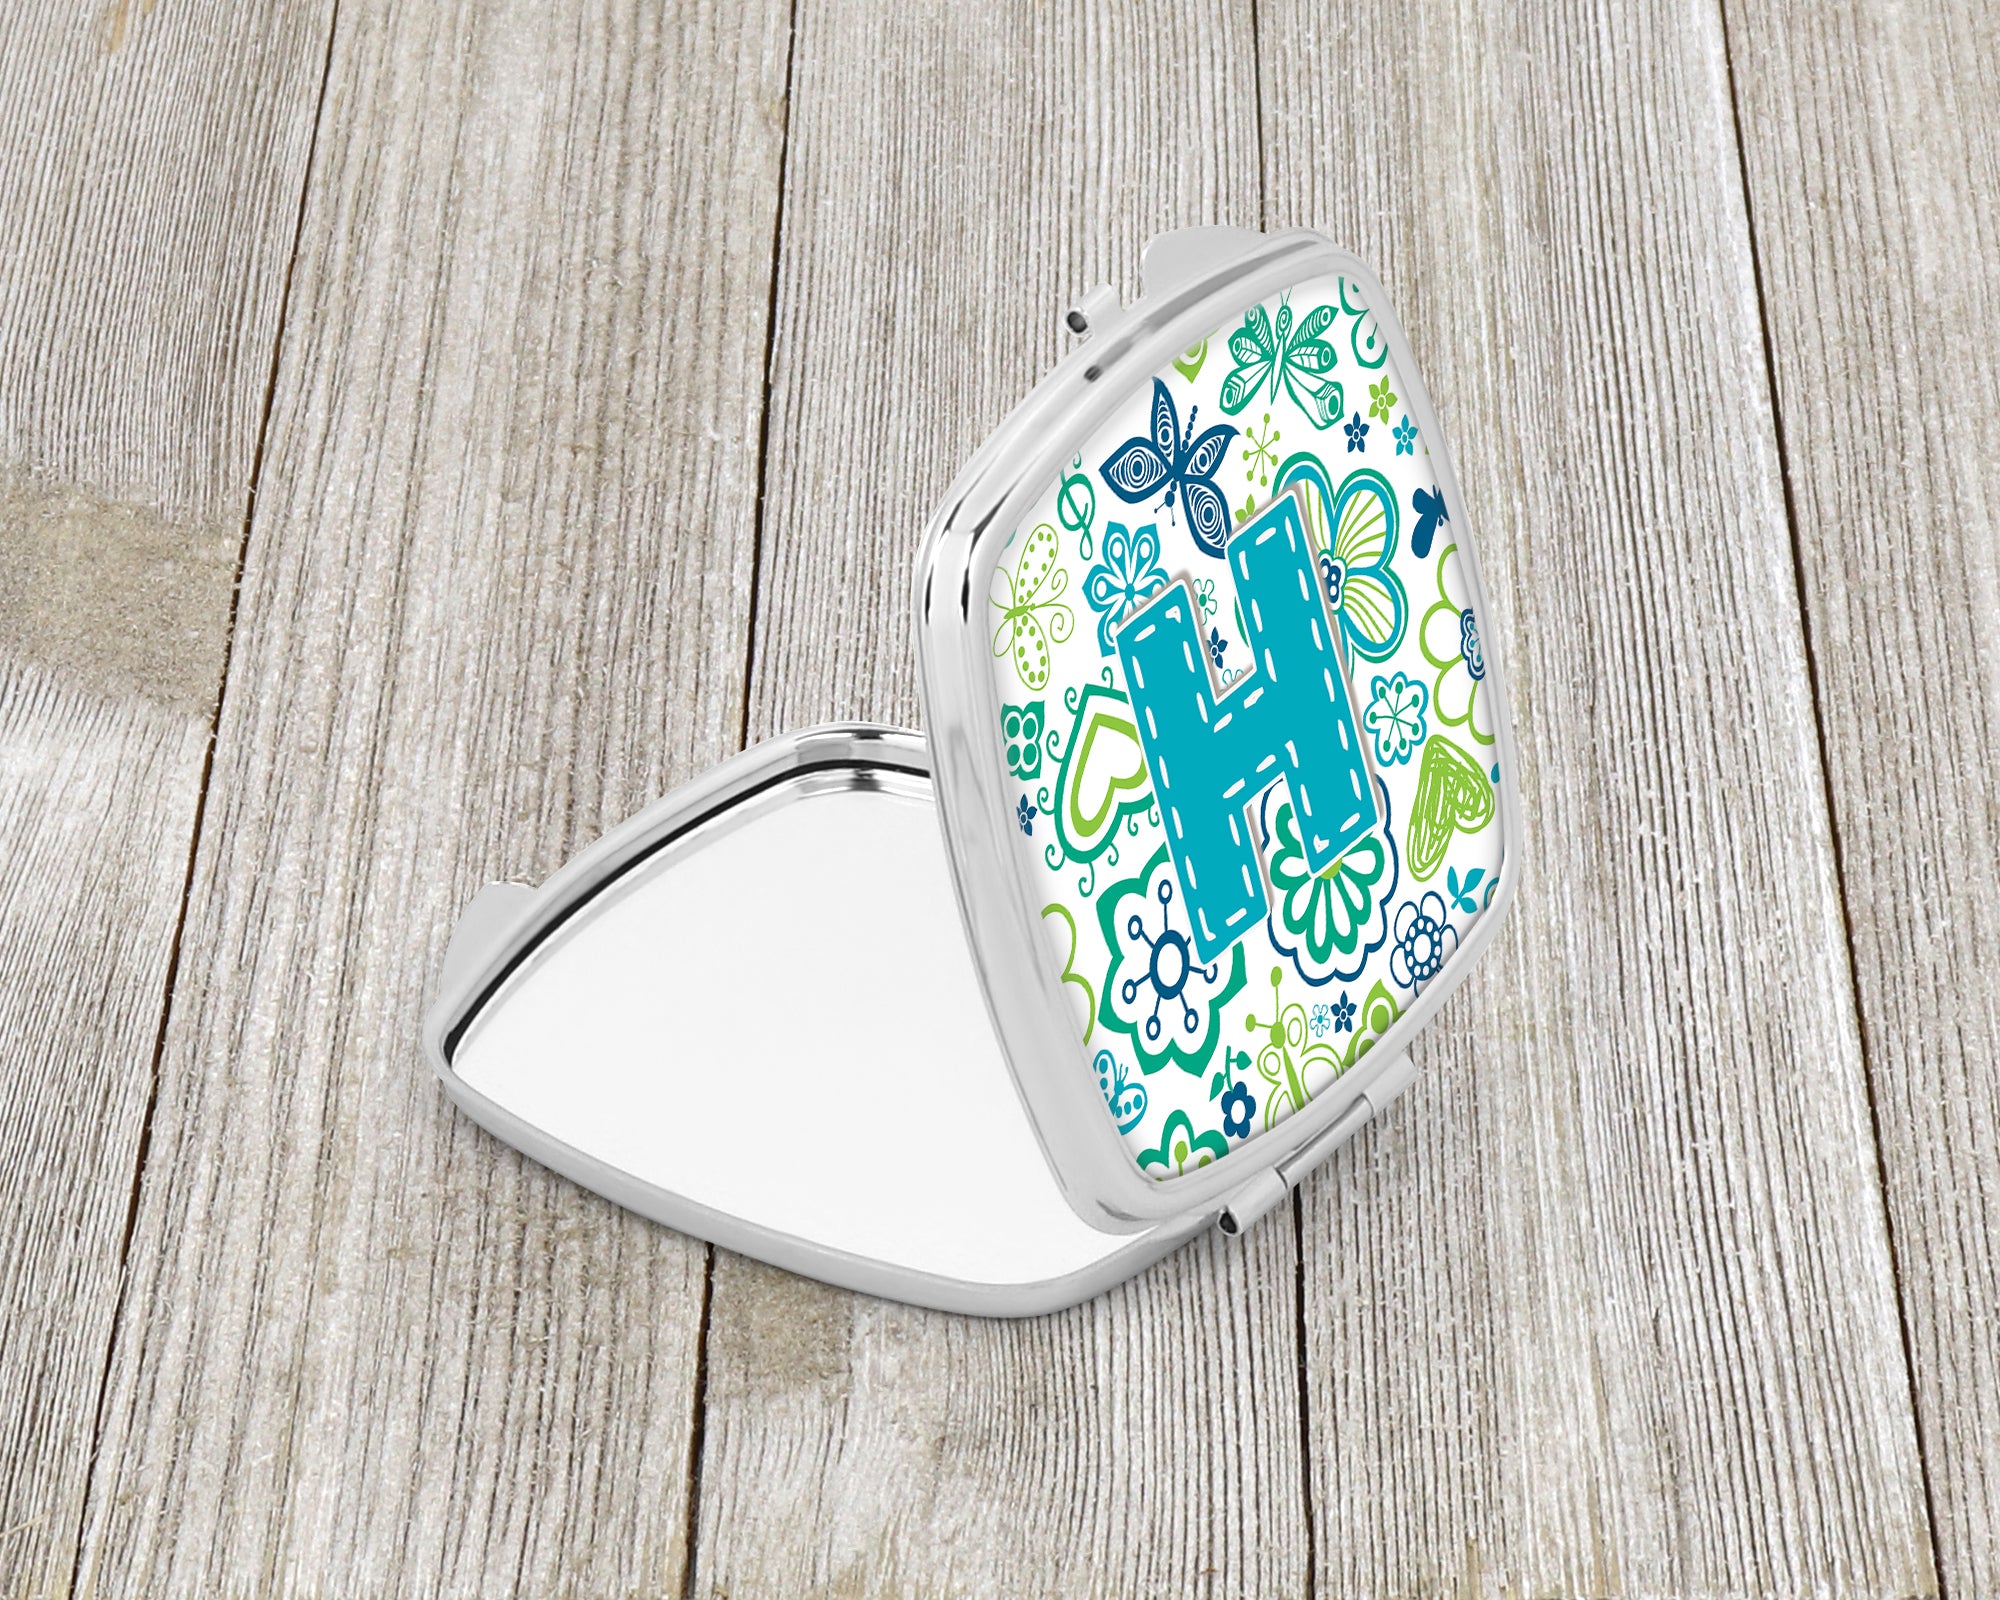 Letter H Flowers and Butterflies Teal Blue Compact Mirror CJ2006-HSCM  the-store.com.